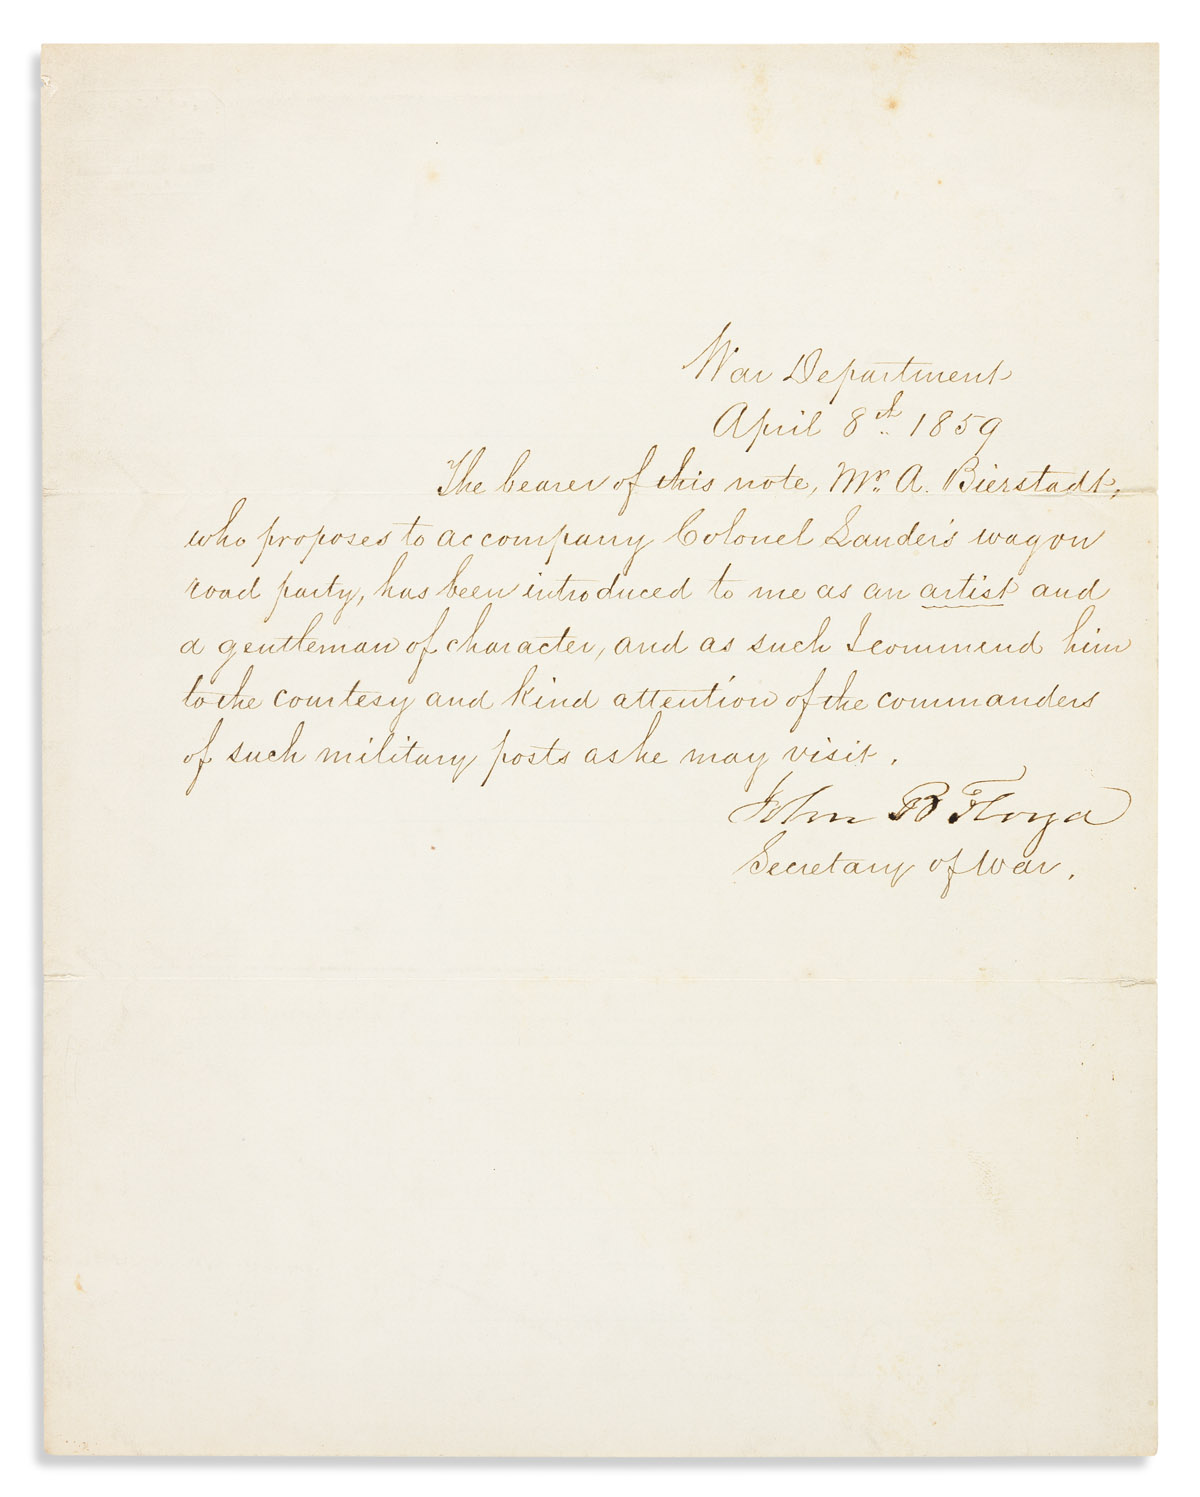 (ART.) John B. Floyd. Letter of recommendation for the painter Albert Bierstadt to bring on his first Western trip.